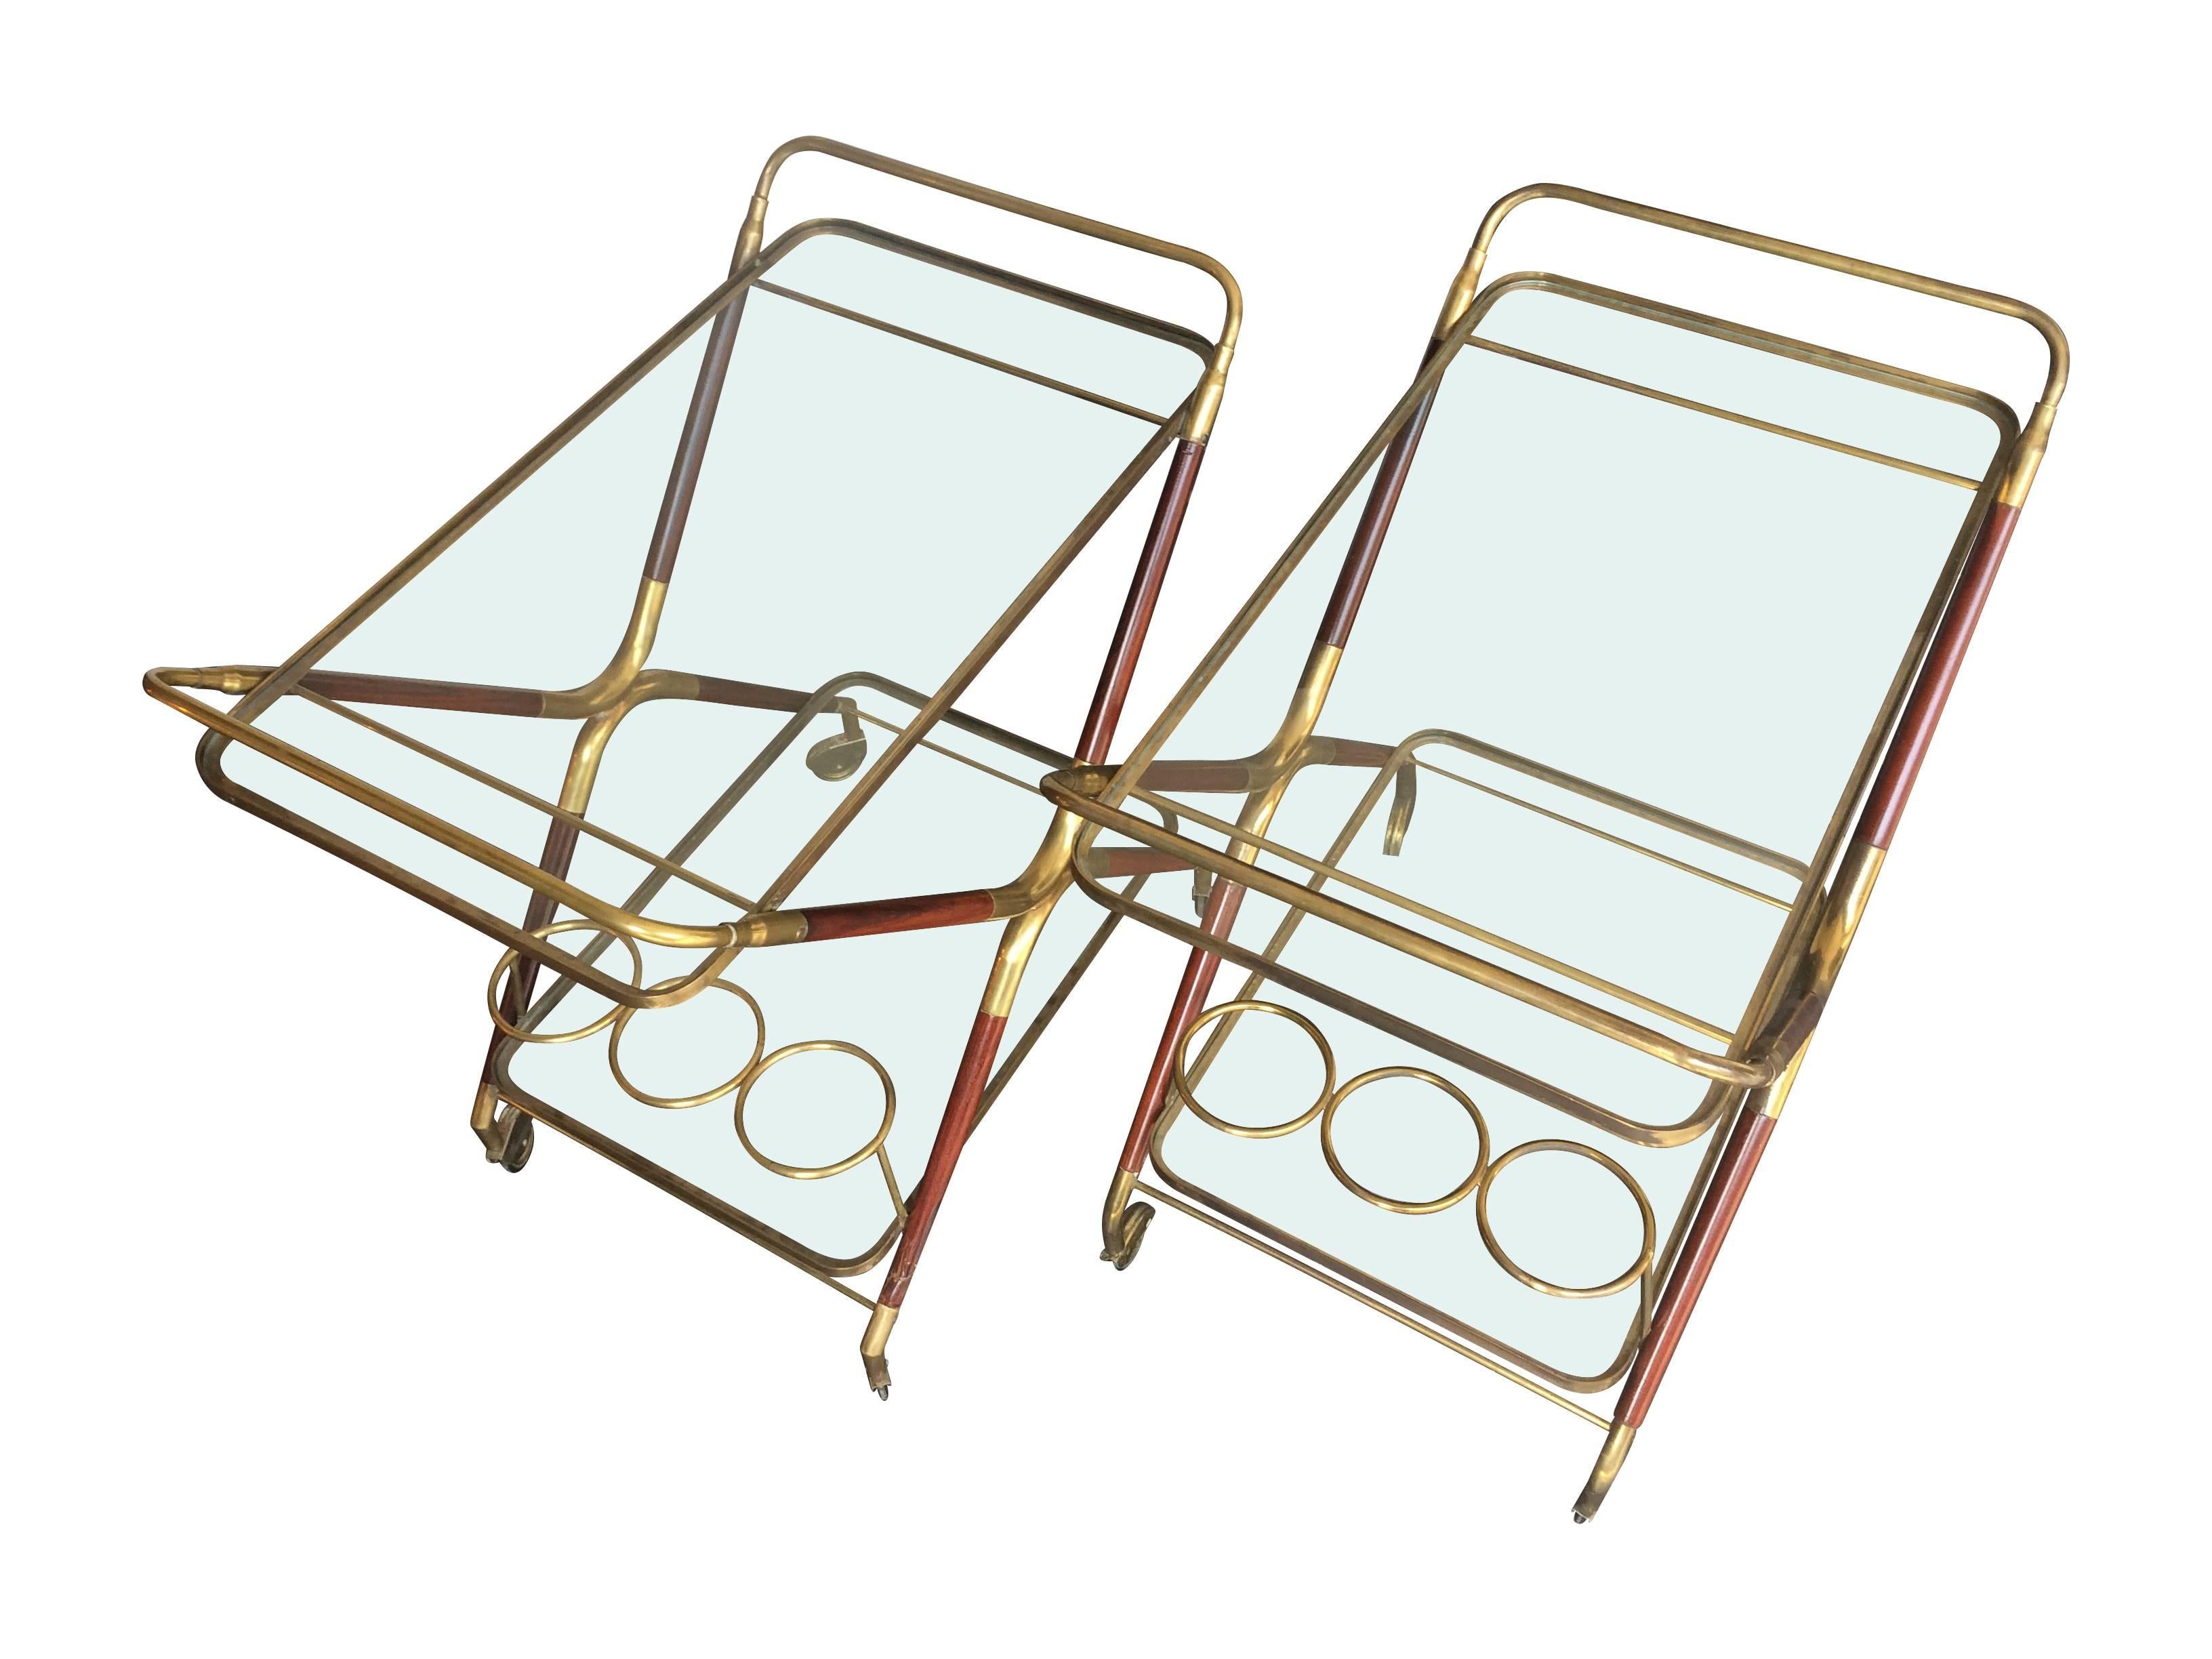 A Cesare Lacca Italian bar cart, with brass and varnished rosewood frames with two glass shelves, the lower of which has three brass bottle holders, with original castors.